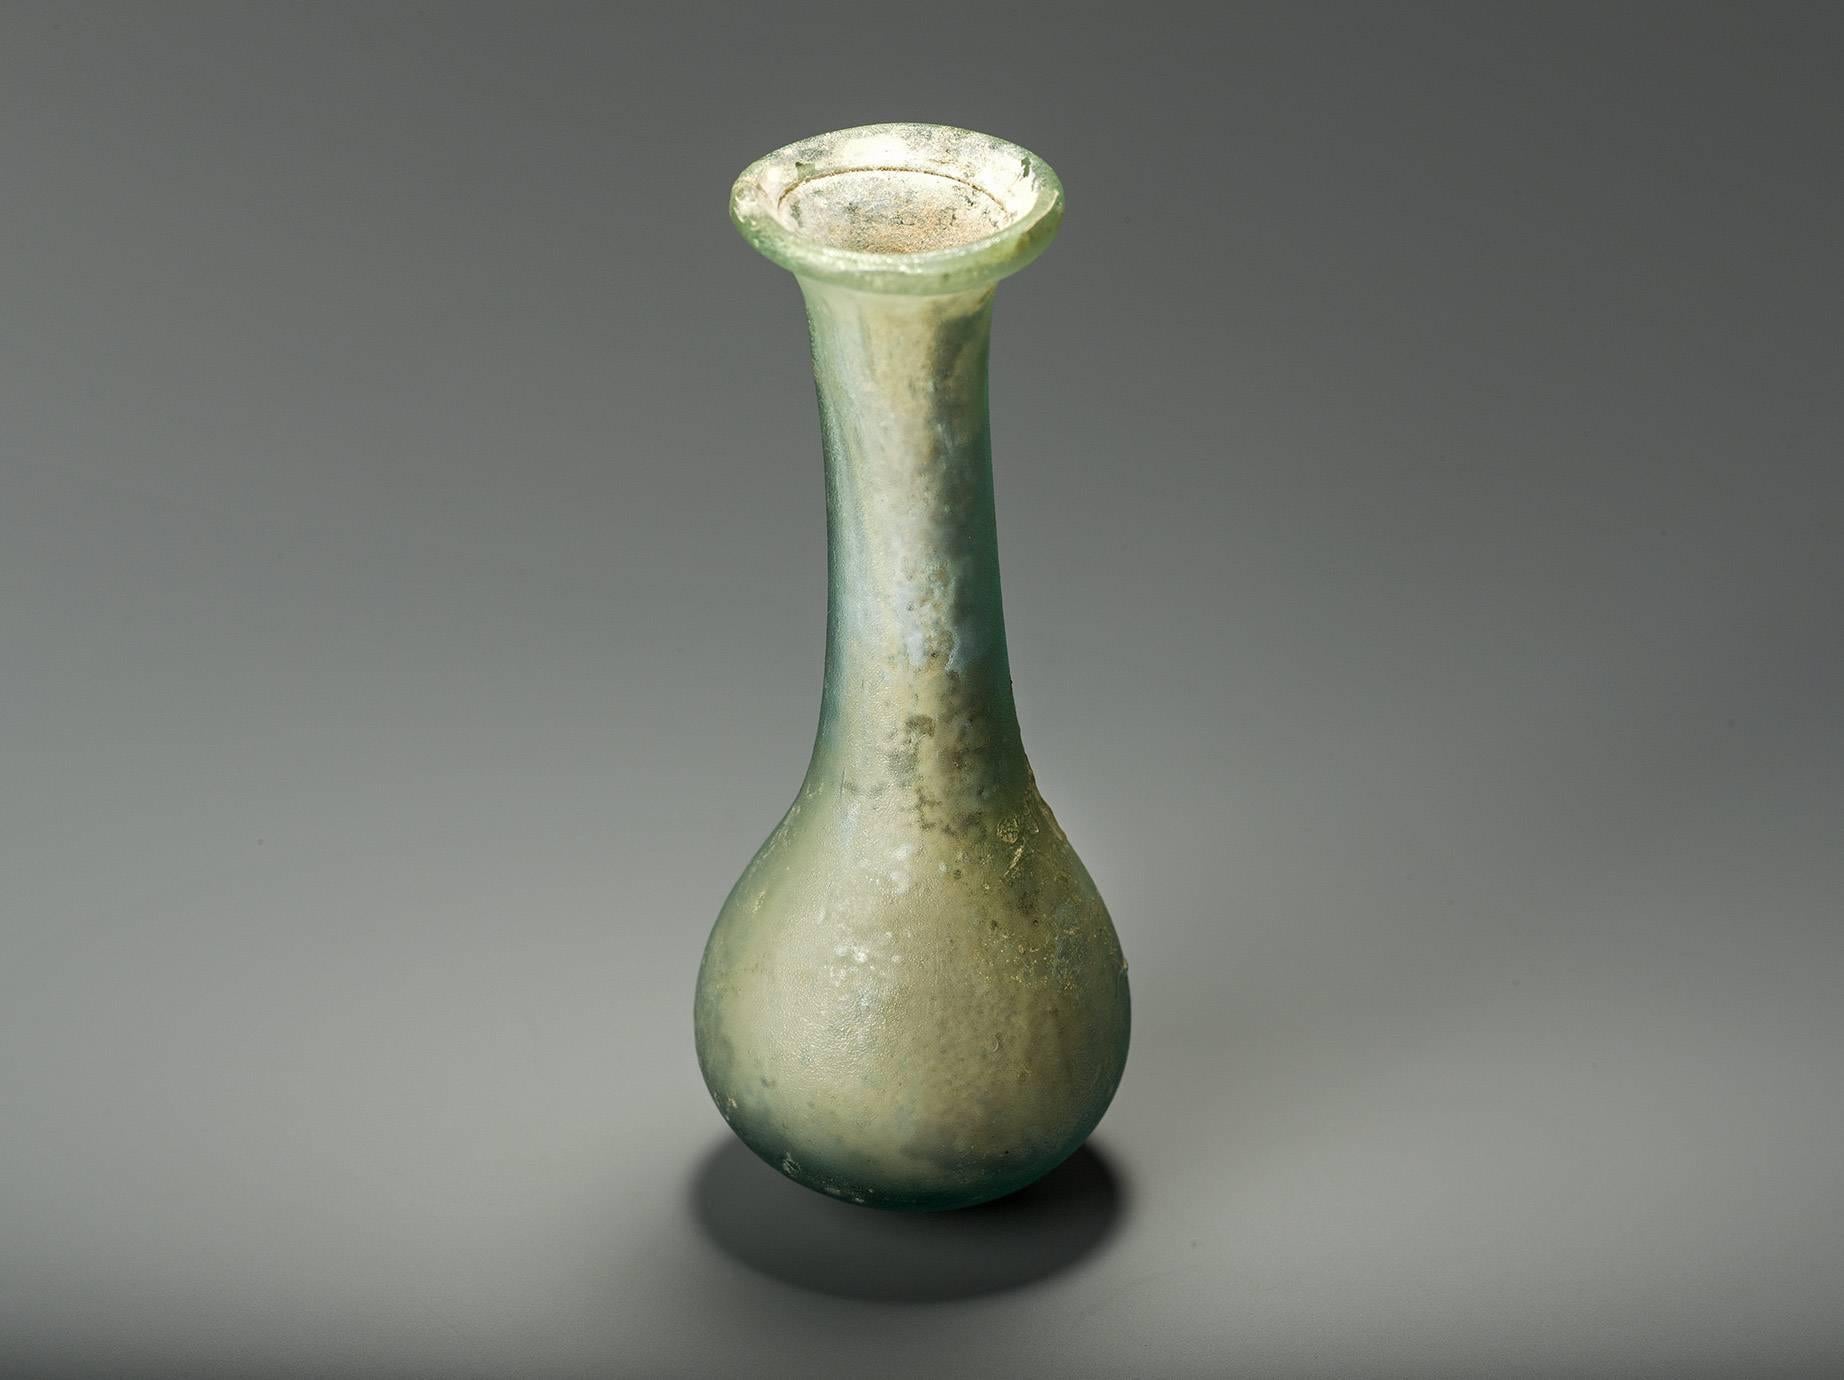 Opaque greyish green glass. Roman, c. 1st Century AD.
This unguent flask has a tall neck that is ending with an inward folded rim. The flask is intact and in very good state of preservation. There is a pin mark, a remains of the glass rod, on the